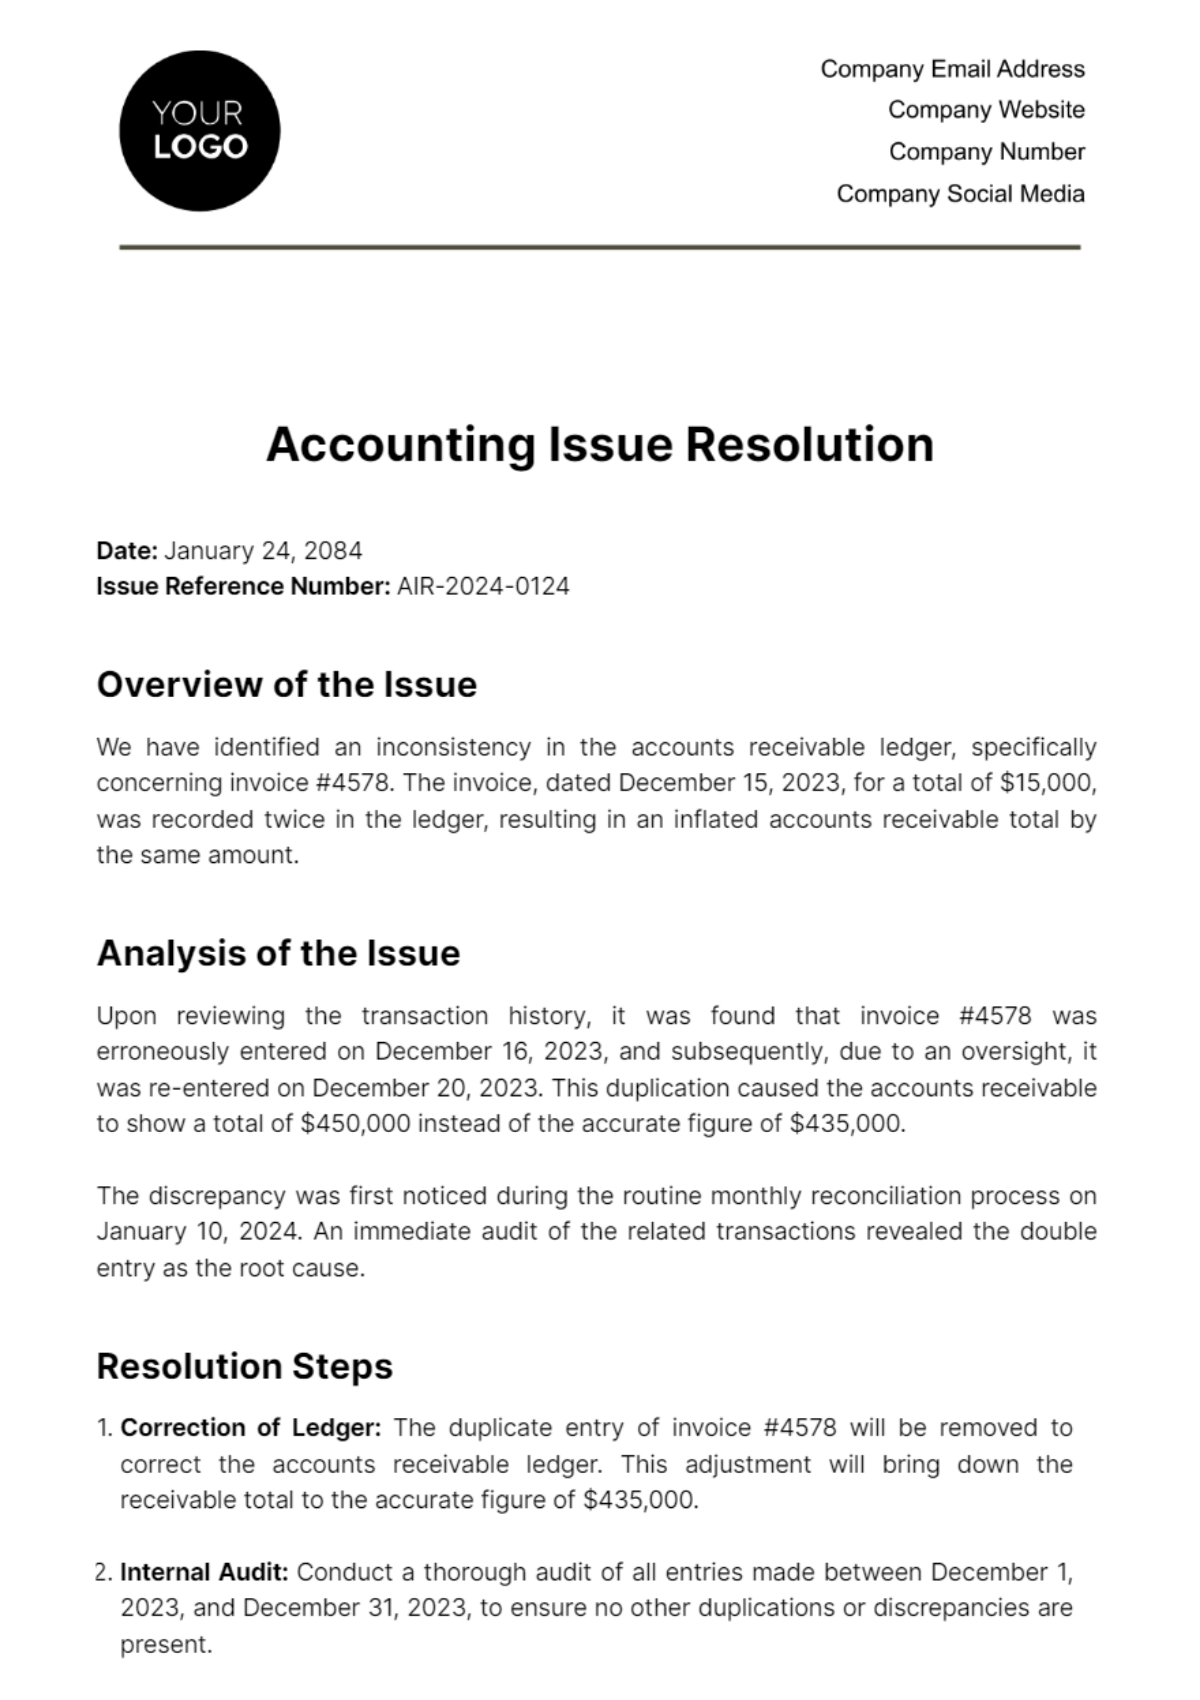 Free Accounting Issue Resolution Template